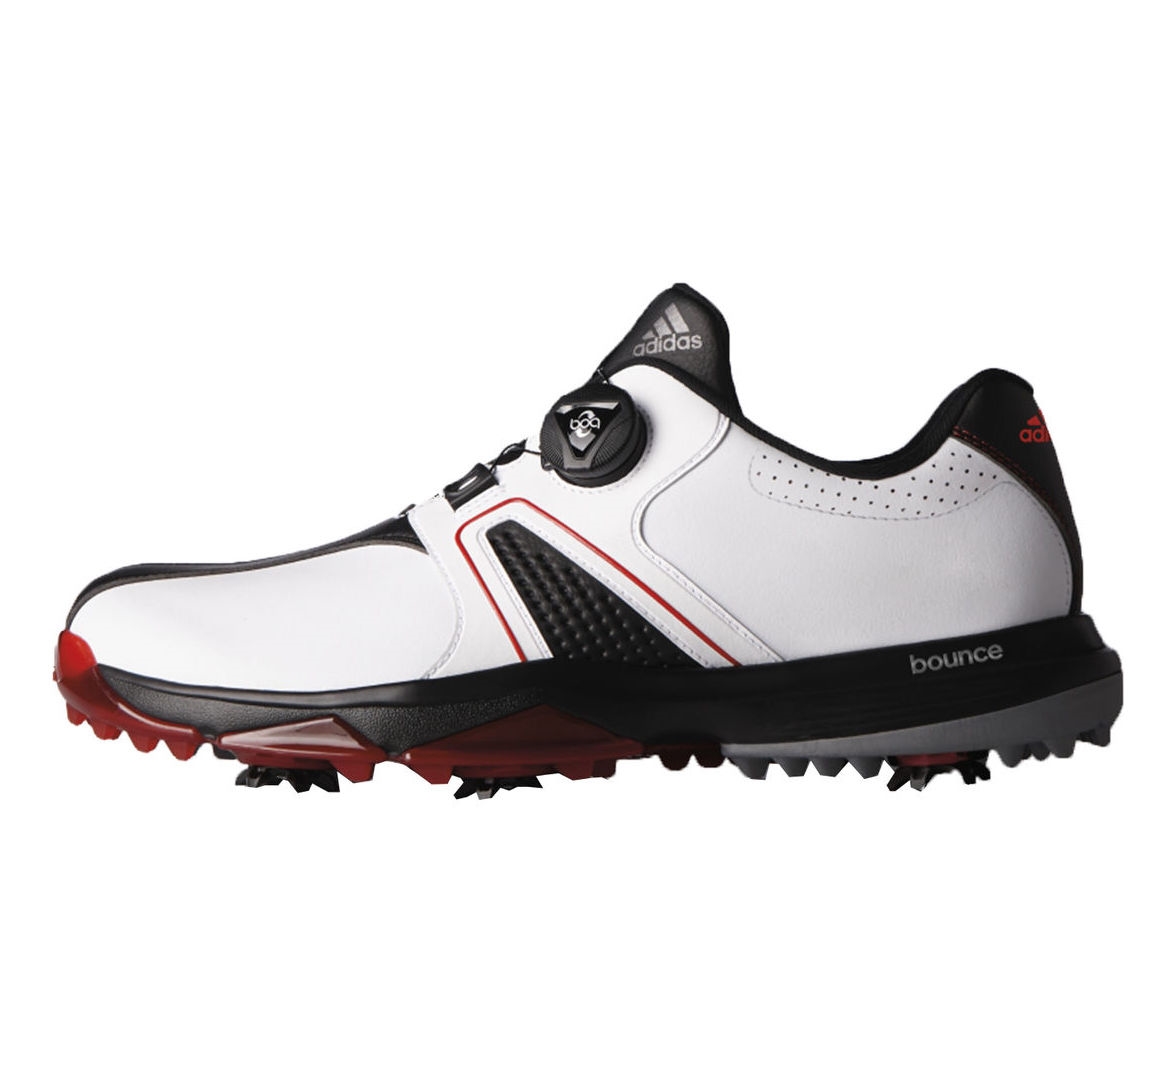 mølle Udholdenhed Hassy Adidas 360 Traxion BOA White/Core Black/Red